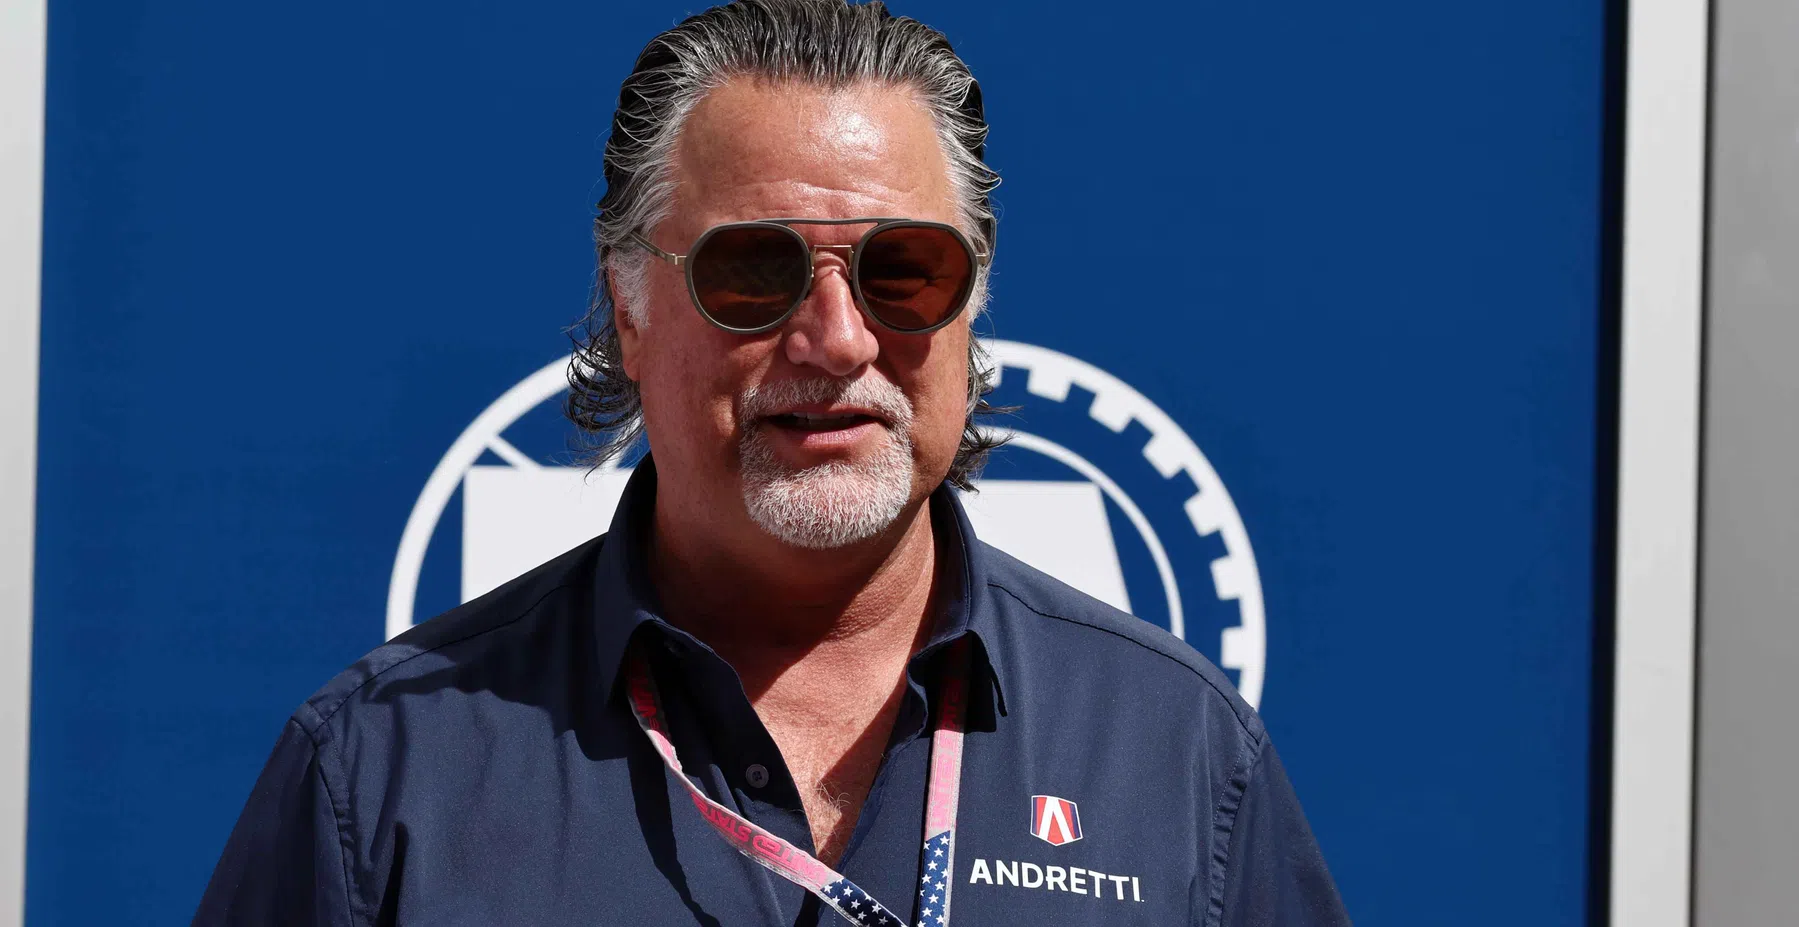 Andretti overlooked invitation from F1